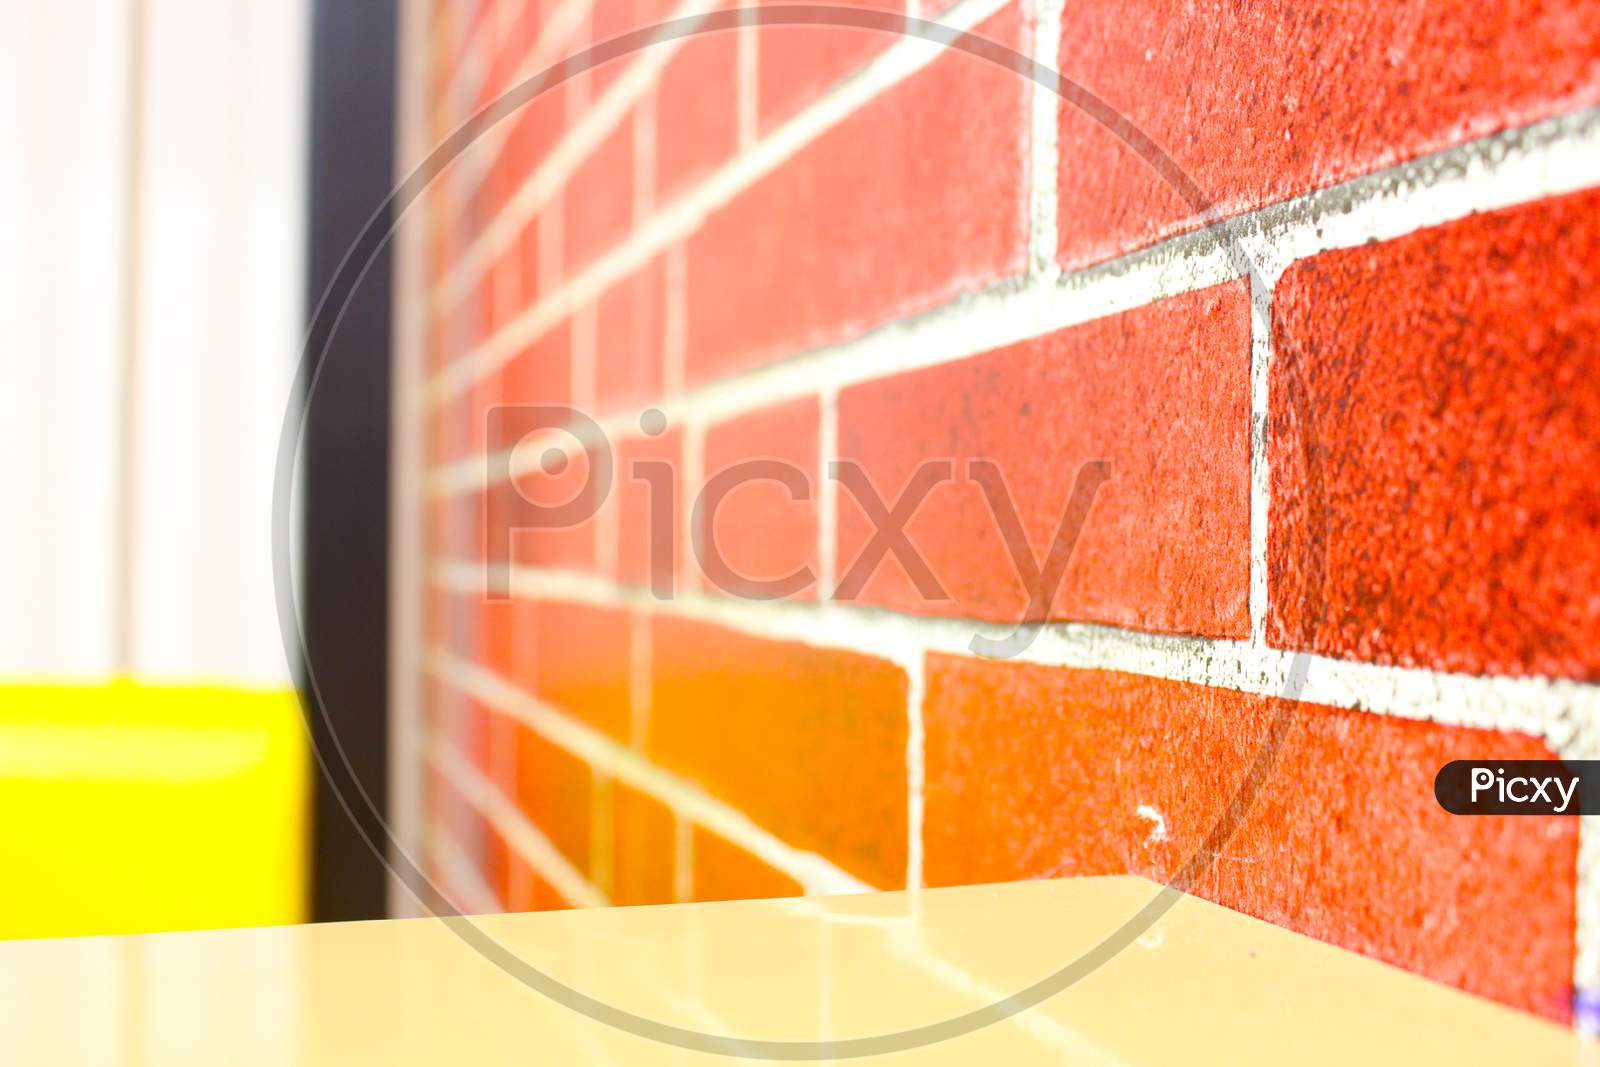 Red Brick Wall In Perspective